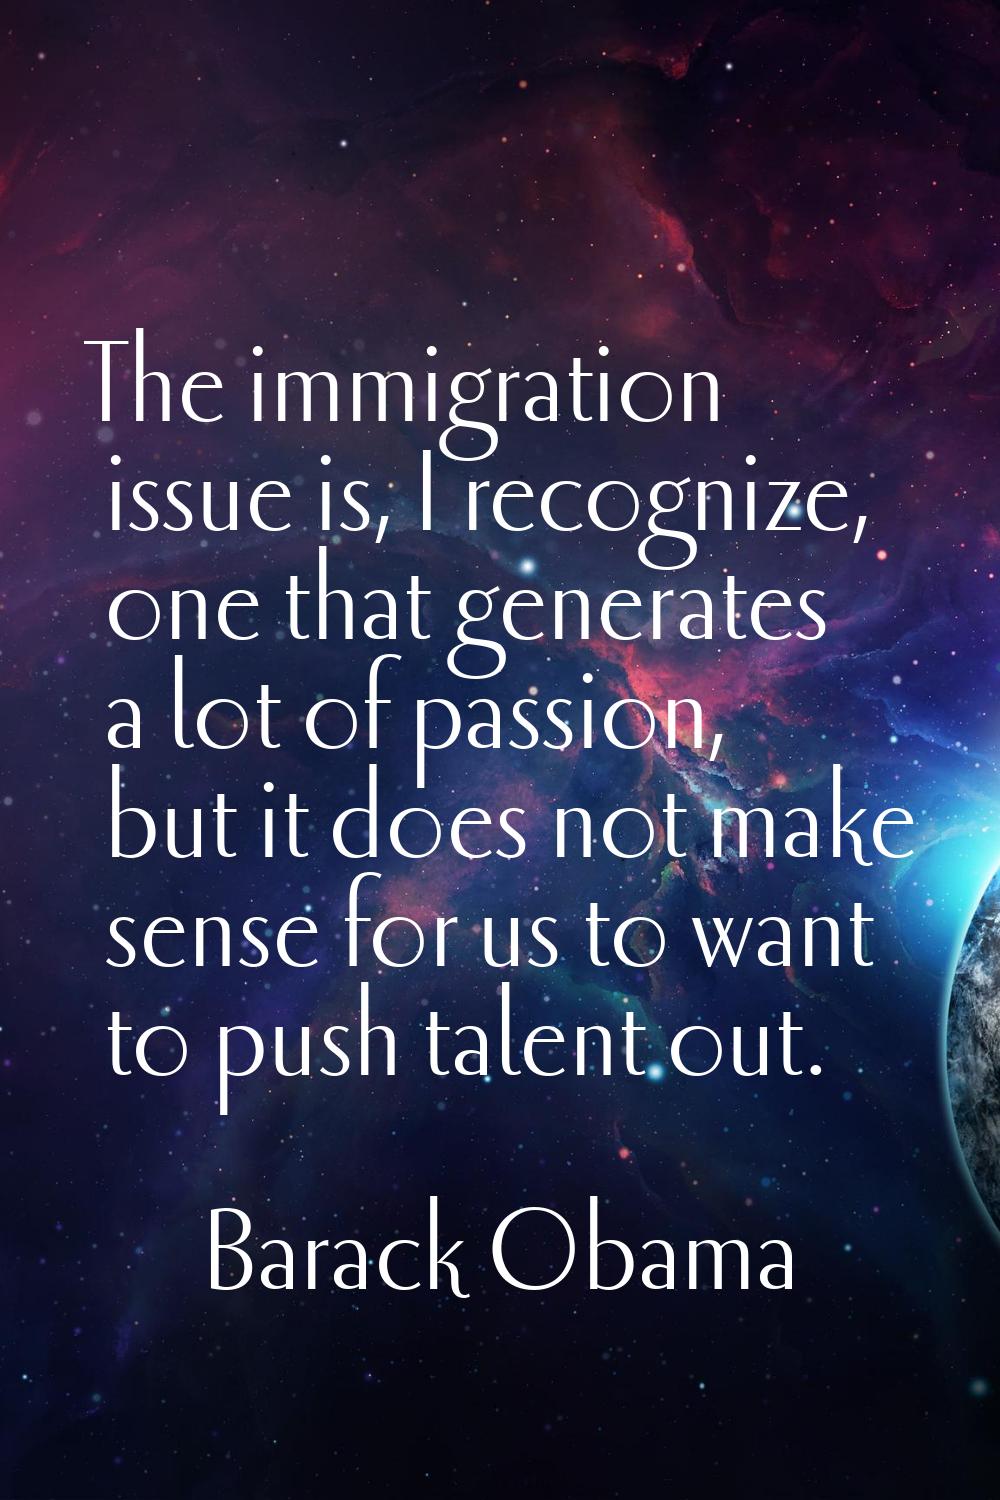 The immigration issue is, I recognize, one that generates a lot of passion, but it does not make se